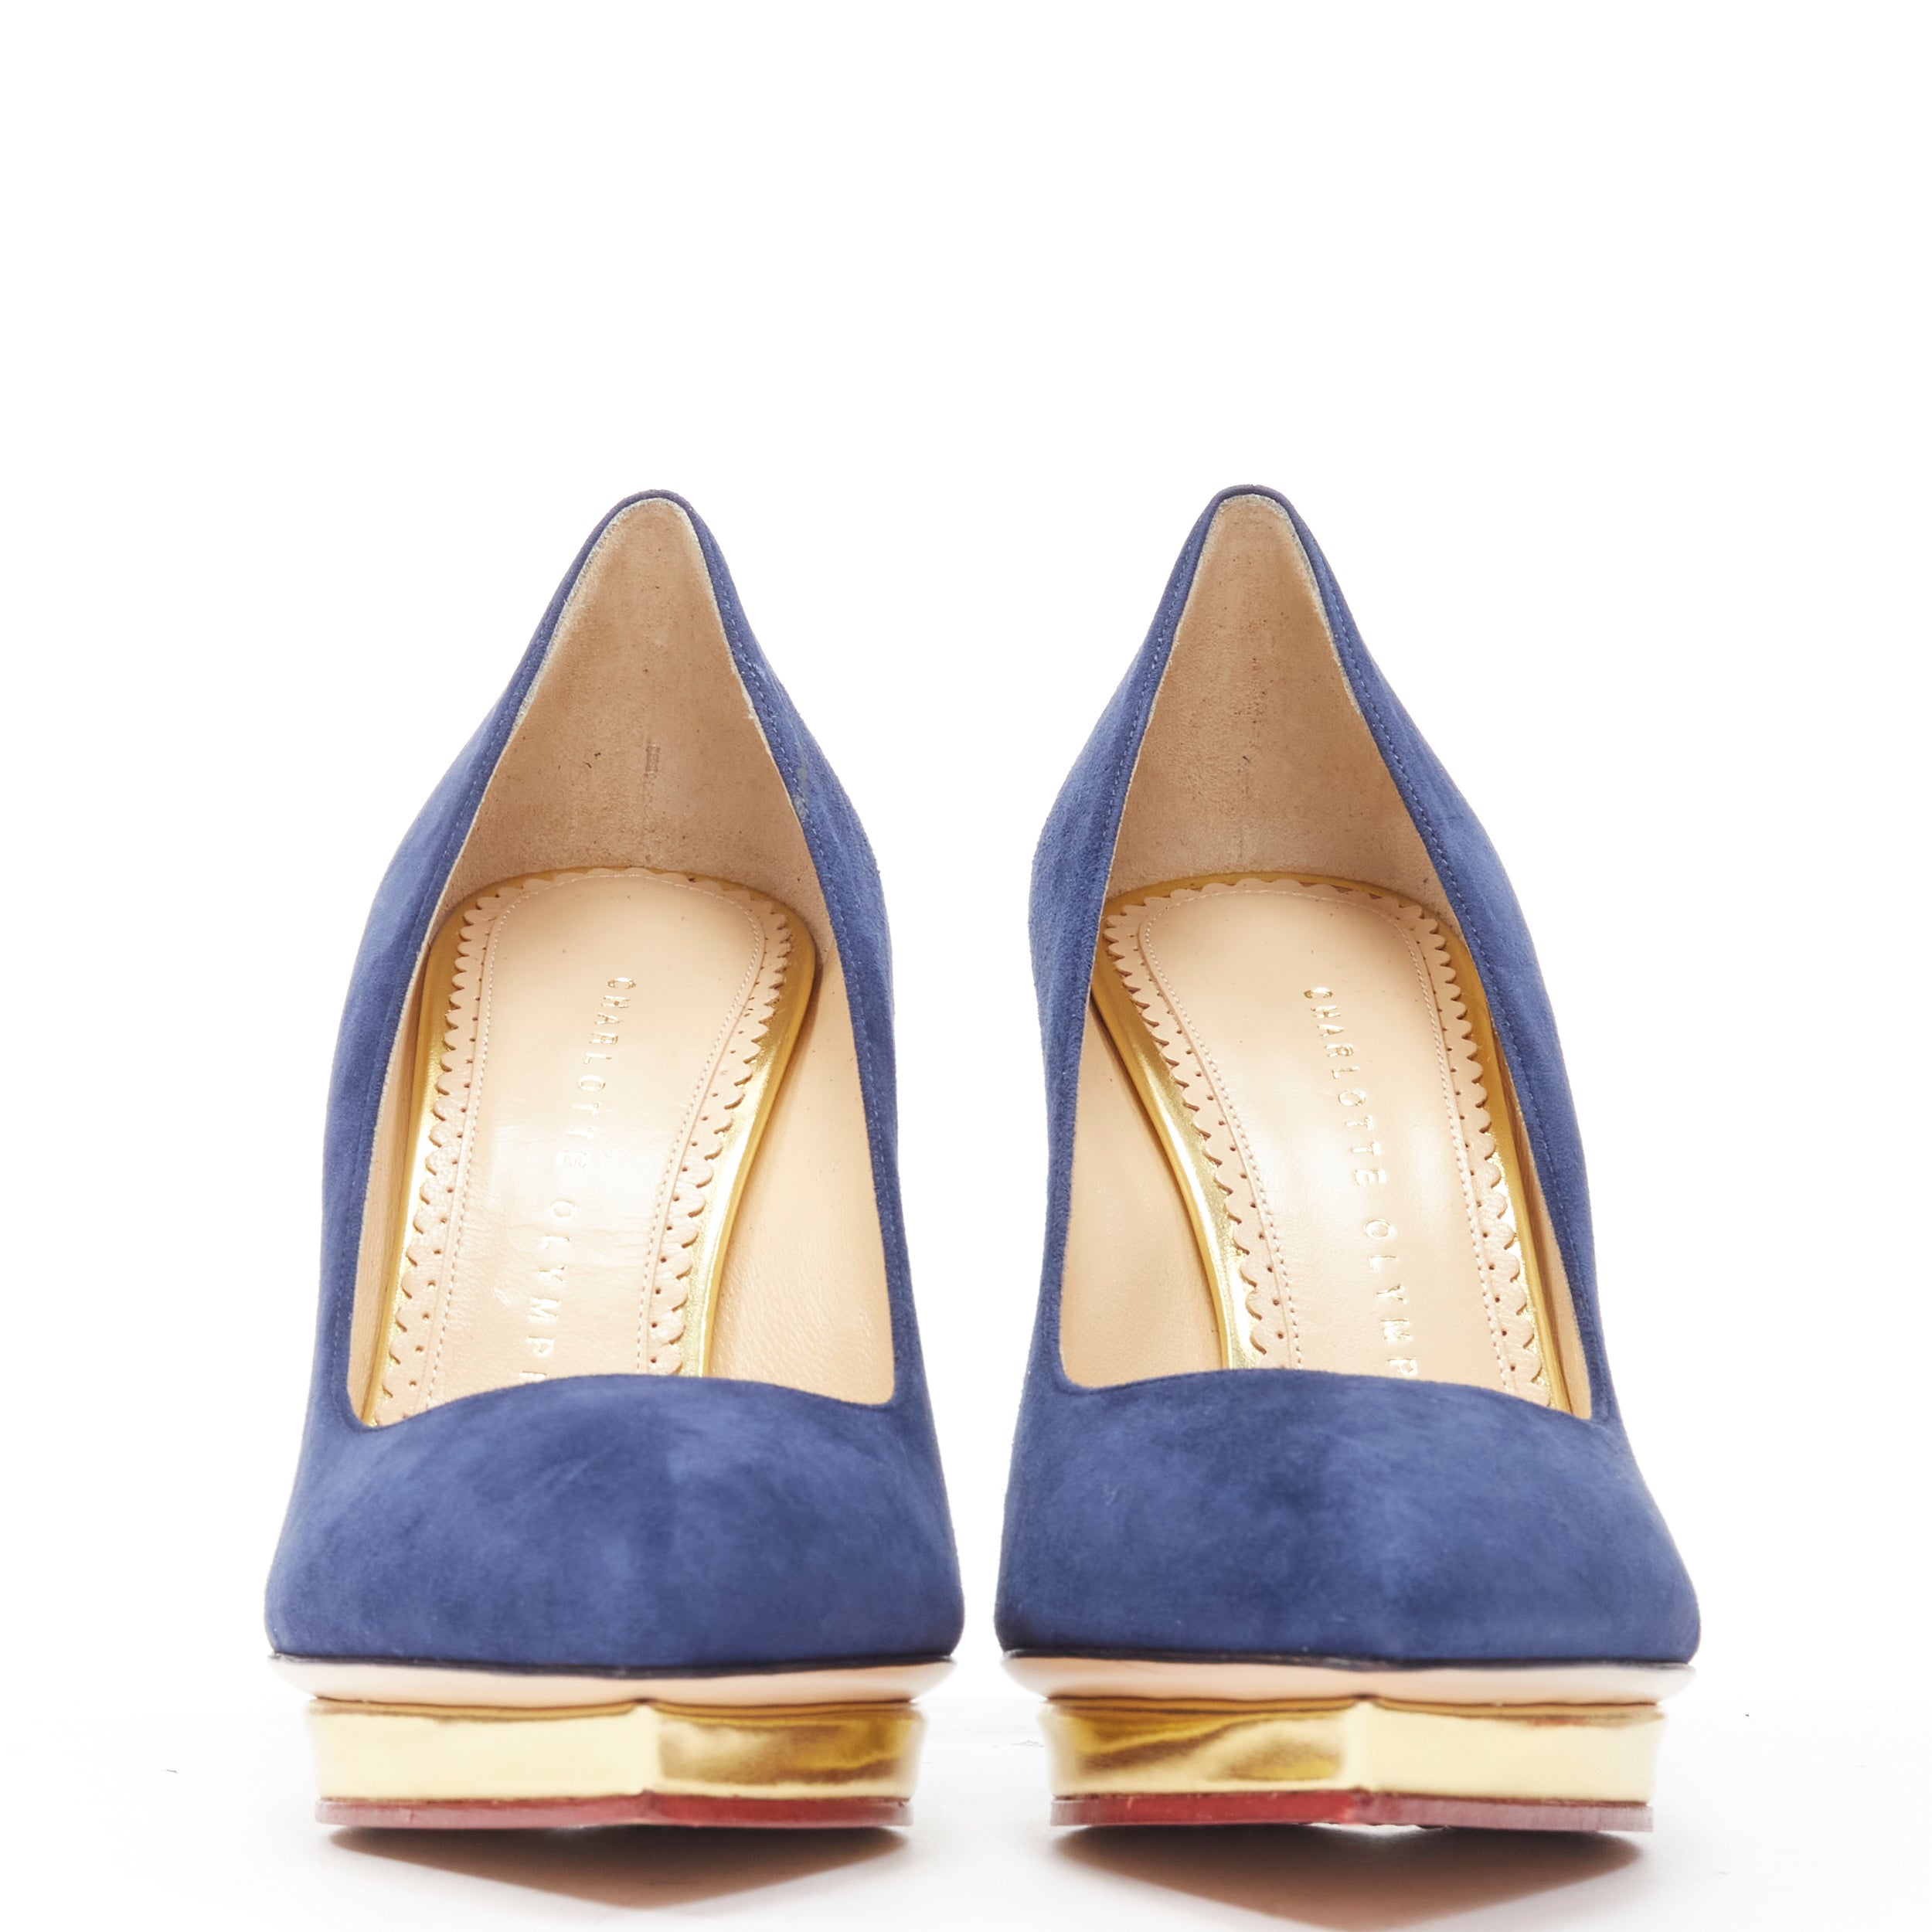 new CHARLOTTE OLYMPIA Debbie navy blue suede gold heart platform pump EU37.5 Reference: MELK/A00212 
Brand: Charlotte Olympia 
Model: Debbie 
Material: Suede 
Color: Navy 
Pattern: Solid 
Extra Detail: Heart shaped platform sole. 
Made in: Italy